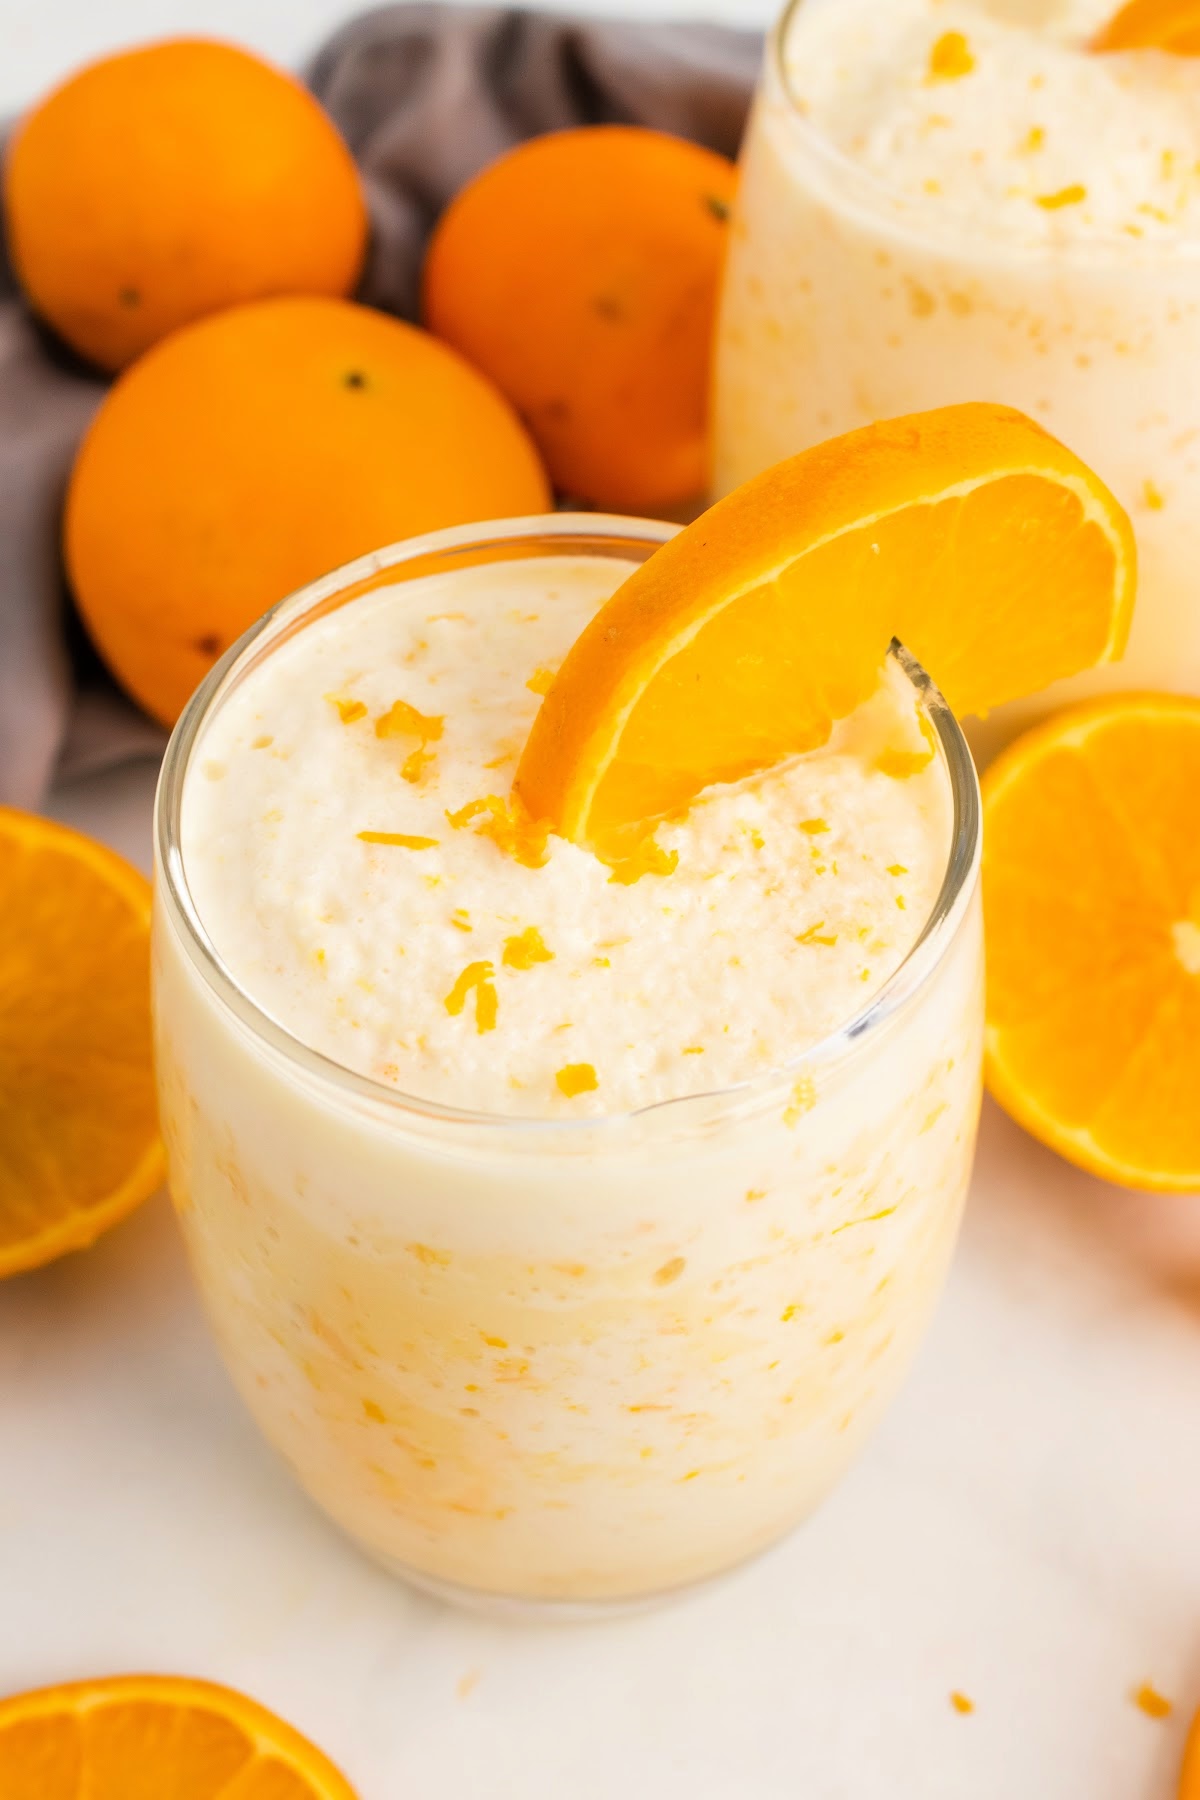 Creamy orange smoothie in a two glasses with fresh orange slices and whole oranges sitting in the background.